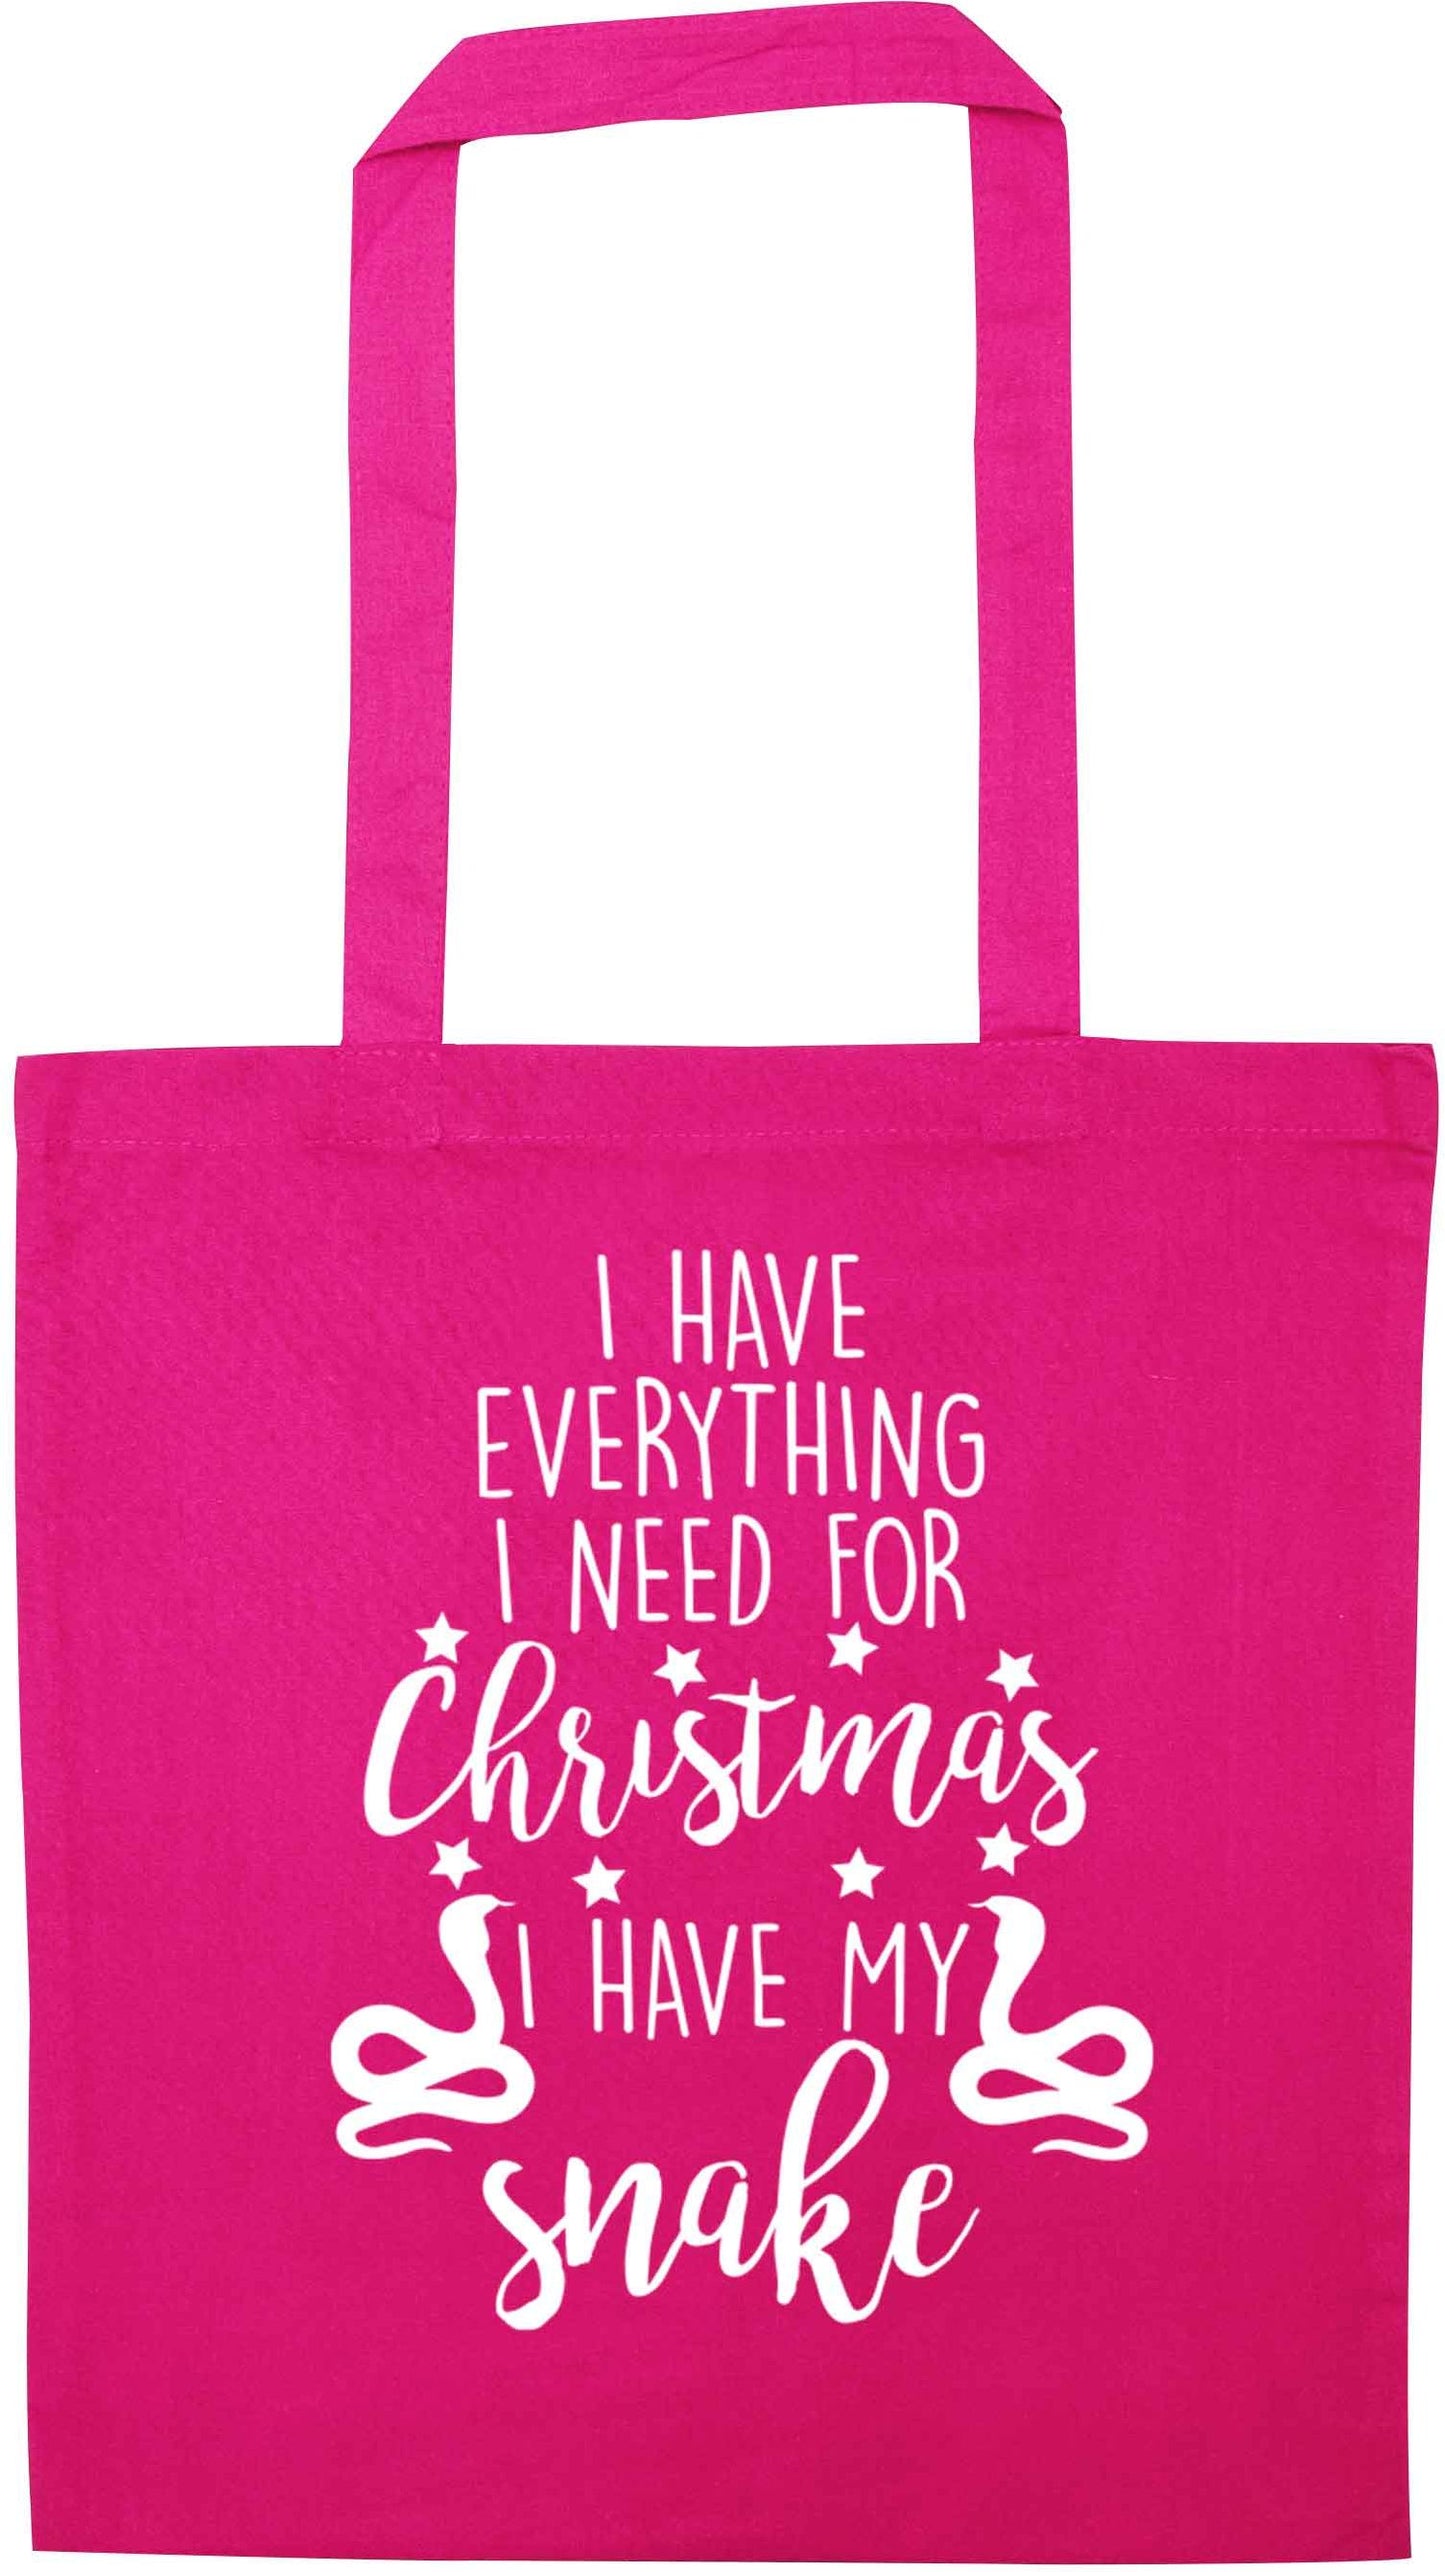 I have everything I need for Christmas I have my snake pink tote bag